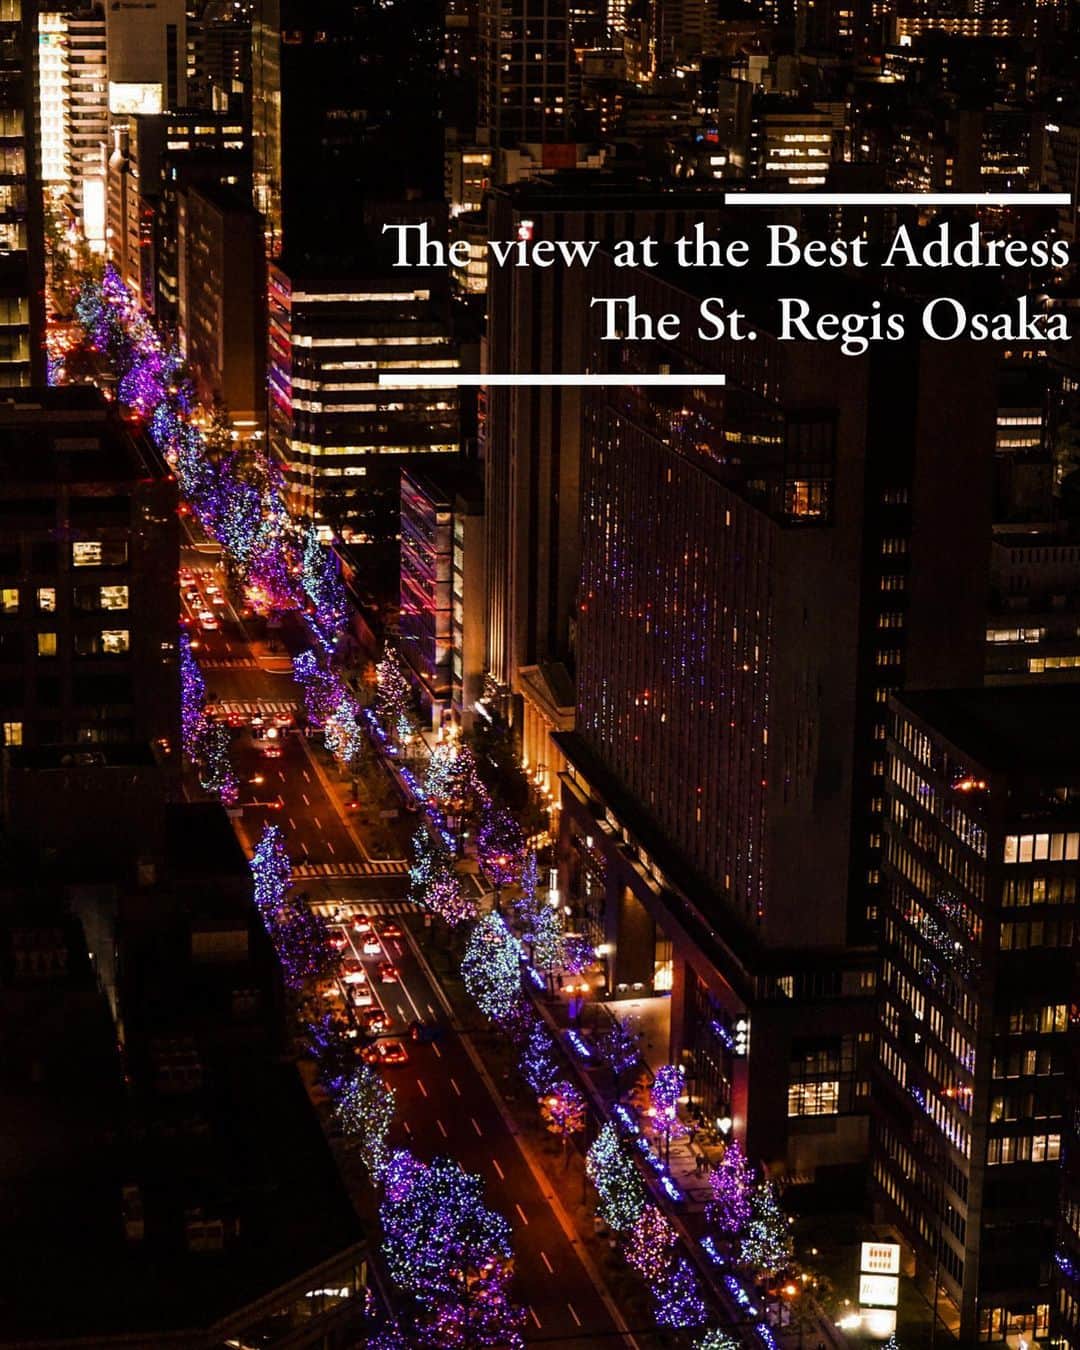 The St. Regis Osakaさんのインスタグラム写真 - (The St. Regis OsakaInstagram)「- セントレジスで、大阪のベストアドレスからの眺めを。  大阪の美しい夜景を眺めていただきながら 最も望まれる場所で皆様をお迎えできることを 嬉しく思います。  現在、ホテル前の御堂筋では 美しくライトアップされたイルミネーションを 4kmにわたってお愉しみいただけます。  The view at the Best Address - The St.Regis Osaka.  We are delighted to host you at the most coveted address with an impeccable view of Osaka.  Midosuji is now lighted up with the most illuminated trees and stretched for 4 km between the Ooebashi-Kitazune and Hanshin-mae intersections.  #stregis #stregisosaka #セントレジス #セントレジス大阪 #セントレジスホテル大阪 #luxuryhotel #marriottbonvoy #大阪ラグジュアリー #staycation #liveexquisite #stregishotel #escape  #5つ星ホテル #大阪ラグジュアリーホテル #高級ホテル #関西ラグジュアリーホテル #梅田ラグジュアリーホテル」11月23日 18時39分 - stregisosaka